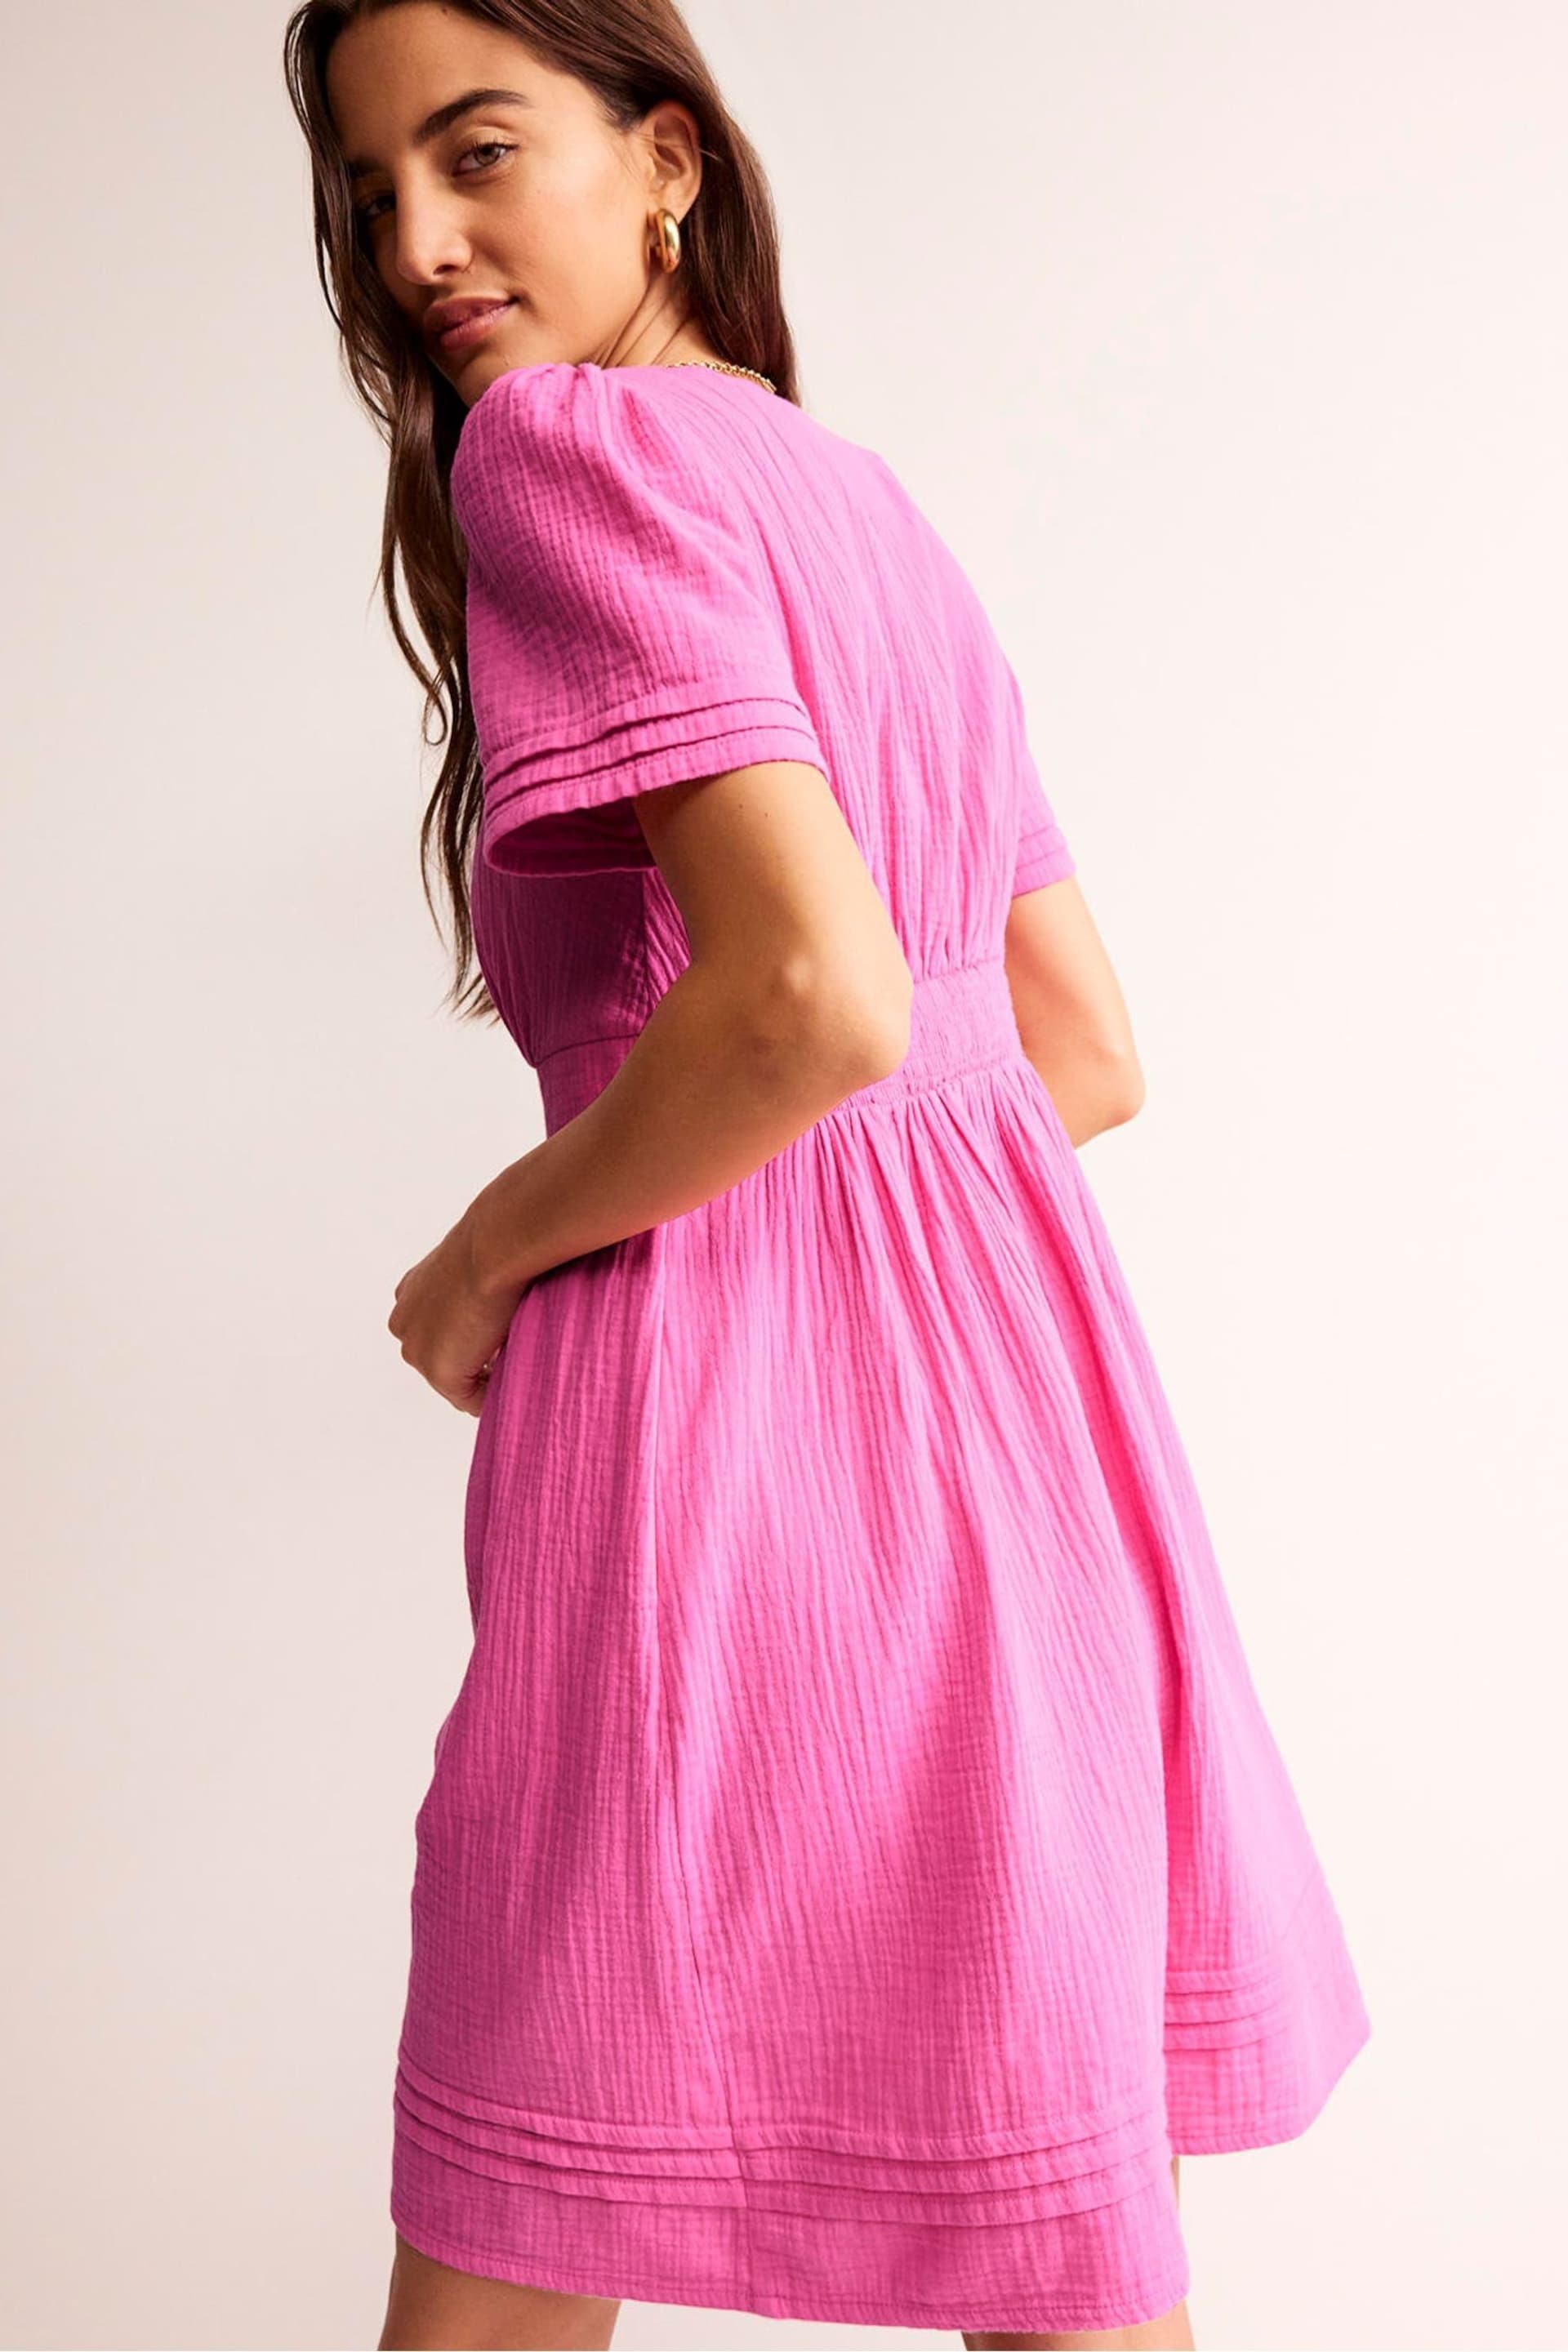 Boden Pink Eve Double Cloth Short Dress - Image 3 of 5